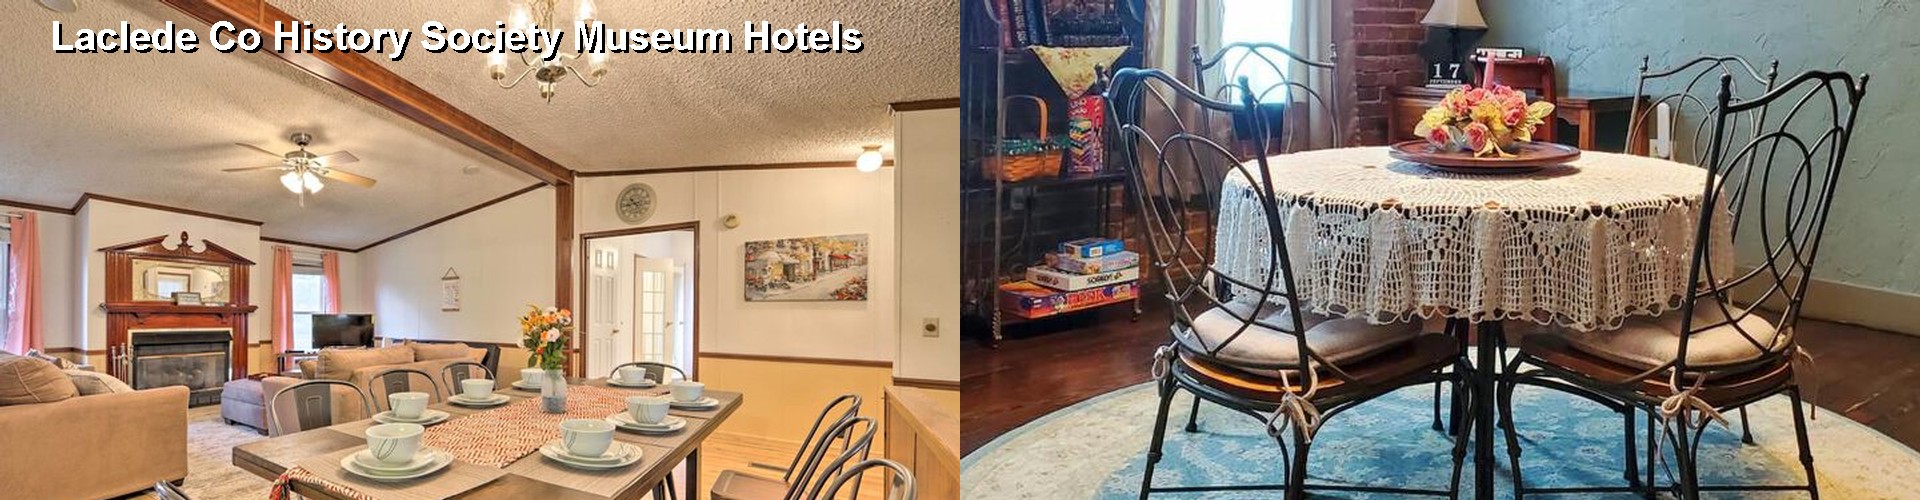 5 Best Hotels near Laclede Co History Society Museum